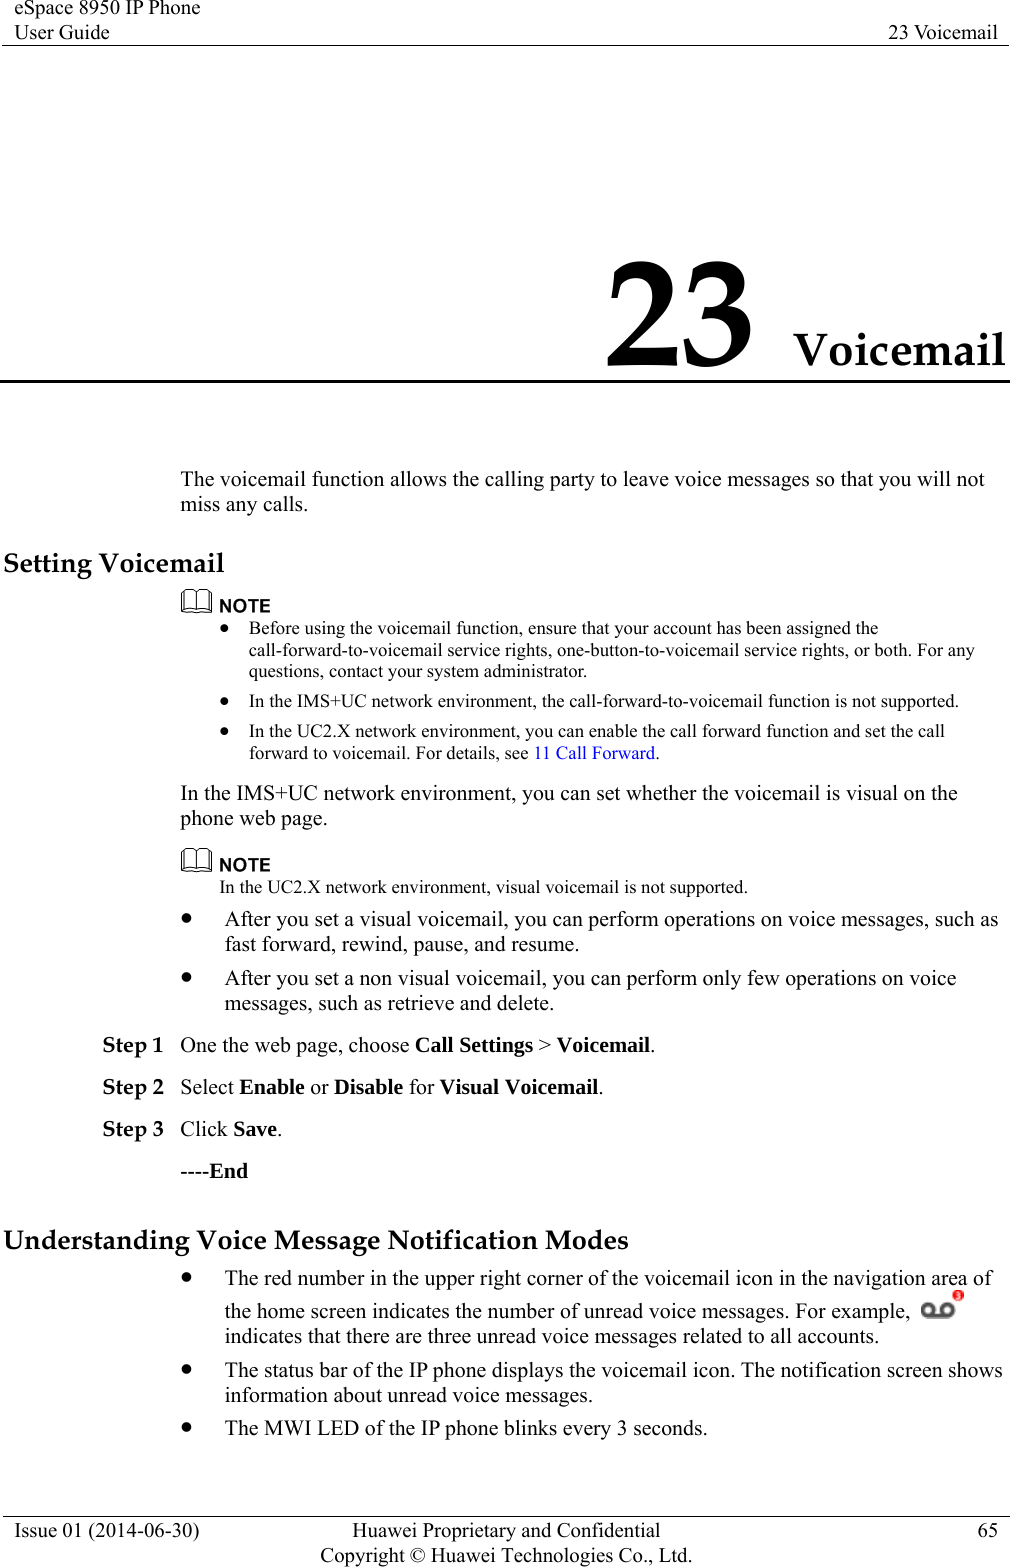 eSpace 8950 IP Phone User Guide  23 Voicemail Issue 01 (2014-06-30)  Huawei Proprietary and Confidential         Copyright © Huawei Technologies Co., Ltd.65 23 Voicemail The voicemail function allows the calling party to leave voice messages so that you will not miss any calls. Setting Voicemail   Before using the voicemail function, ensure that your account has been assigned the call-forward-to-voicemail service rights, one-button-to-voicemail service rights, or both. For any questions, contact your system administrator.  In the IMS+UC network environment, the call-forward-to-voicemail function is not supported.  In the UC2.X network environment, you can enable the call forward function and set the call forward to voicemail. For details, see 11 Call Forward. In the IMS+UC network environment, you can set whether the voicemail is visual on the phone web page.  In the UC2.X network environment, visual voicemail is not supported.  After you set a visual voicemail, you can perform operations on voice messages, such as fast forward, rewind, pause, and resume.  After you set a non visual voicemail, you can perform only few operations on voice messages, such as retrieve and delete. Step 1 One the web page, choose Call Settings &gt; Voicemail. Step 2 Select Enable or Disable for Visual Voicemail. Step 3 Click Save. ----End Understanding Voice Message Notification Modes  The red number in the upper right corner of the voicemail icon in the navigation area of the home screen indicates the number of unread voice messages. For example,   indicates that there are three unread voice messages related to all accounts.  The status bar of the IP phone displays the voicemail icon. The notification screen shows information about unread voice messages.  The MWI LED of the IP phone blinks every 3 seconds. 